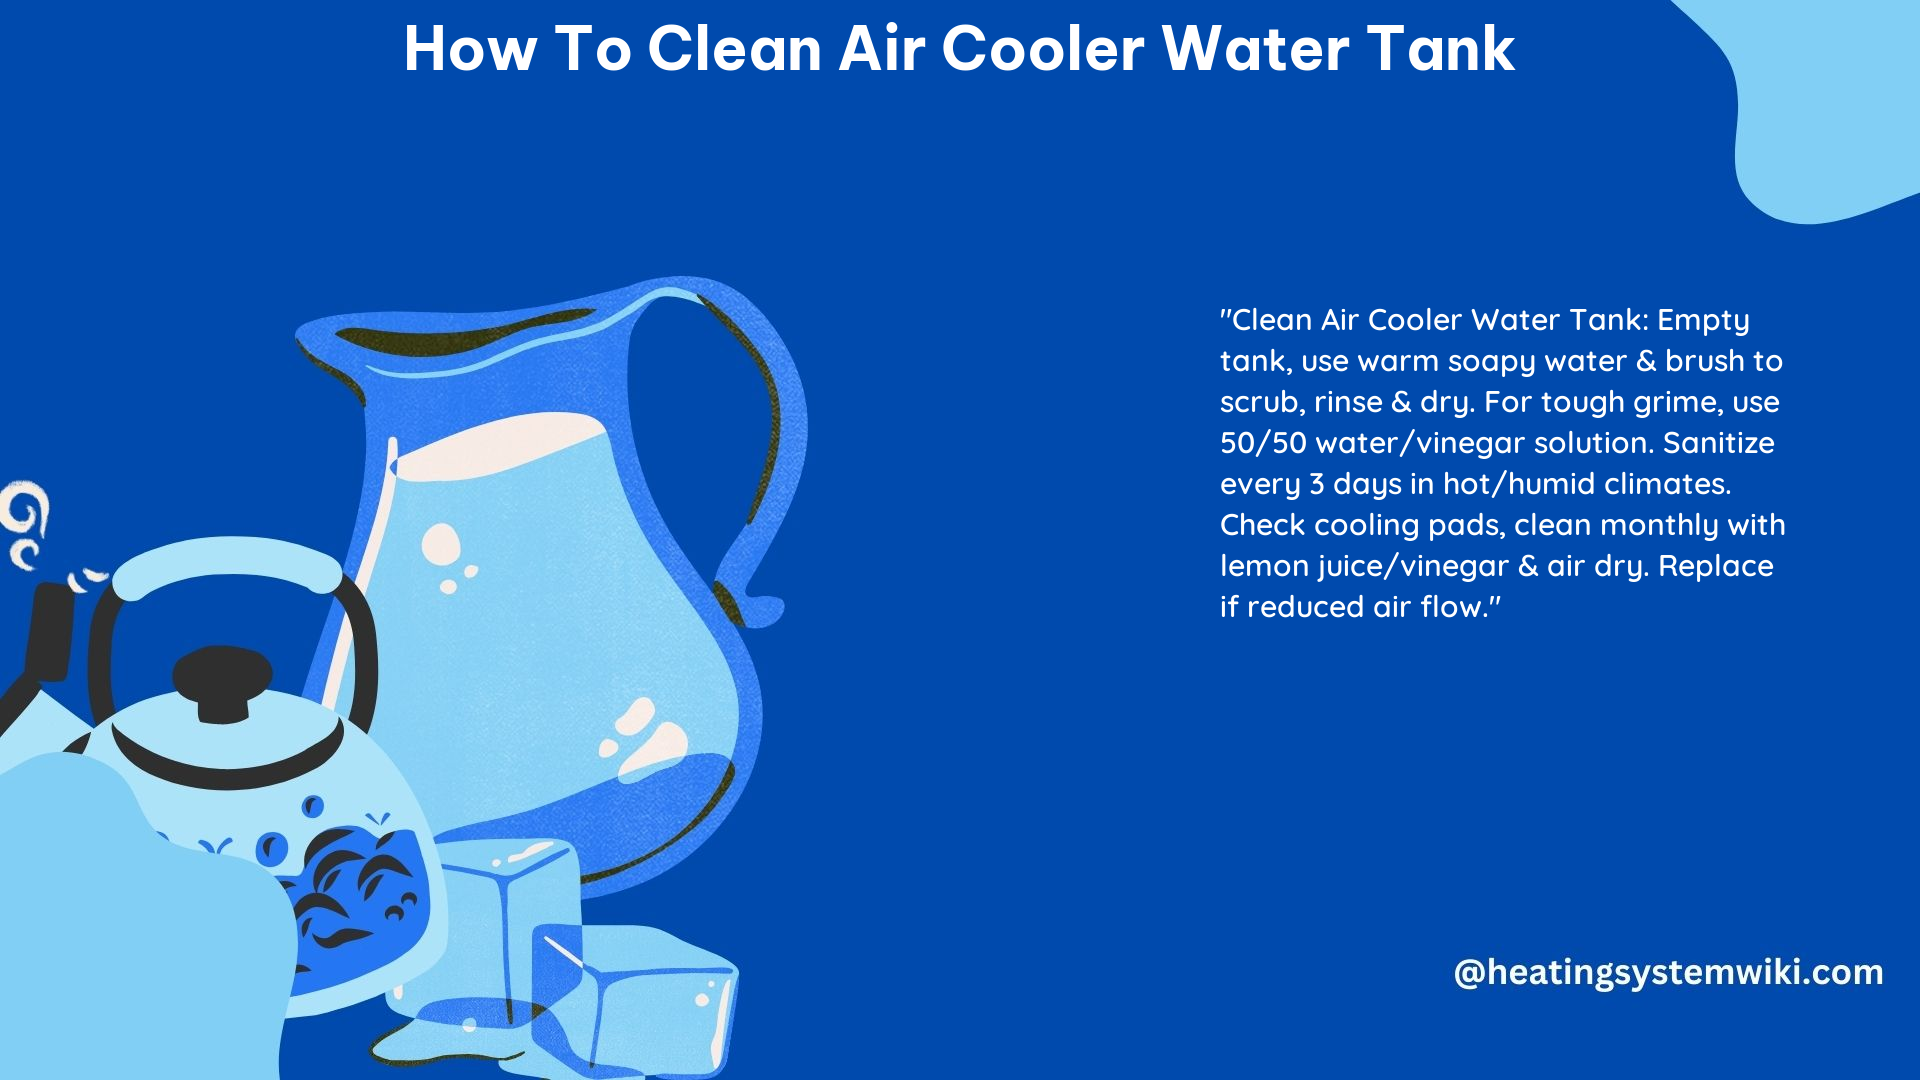 How to Clean Air Cooler Water Tank